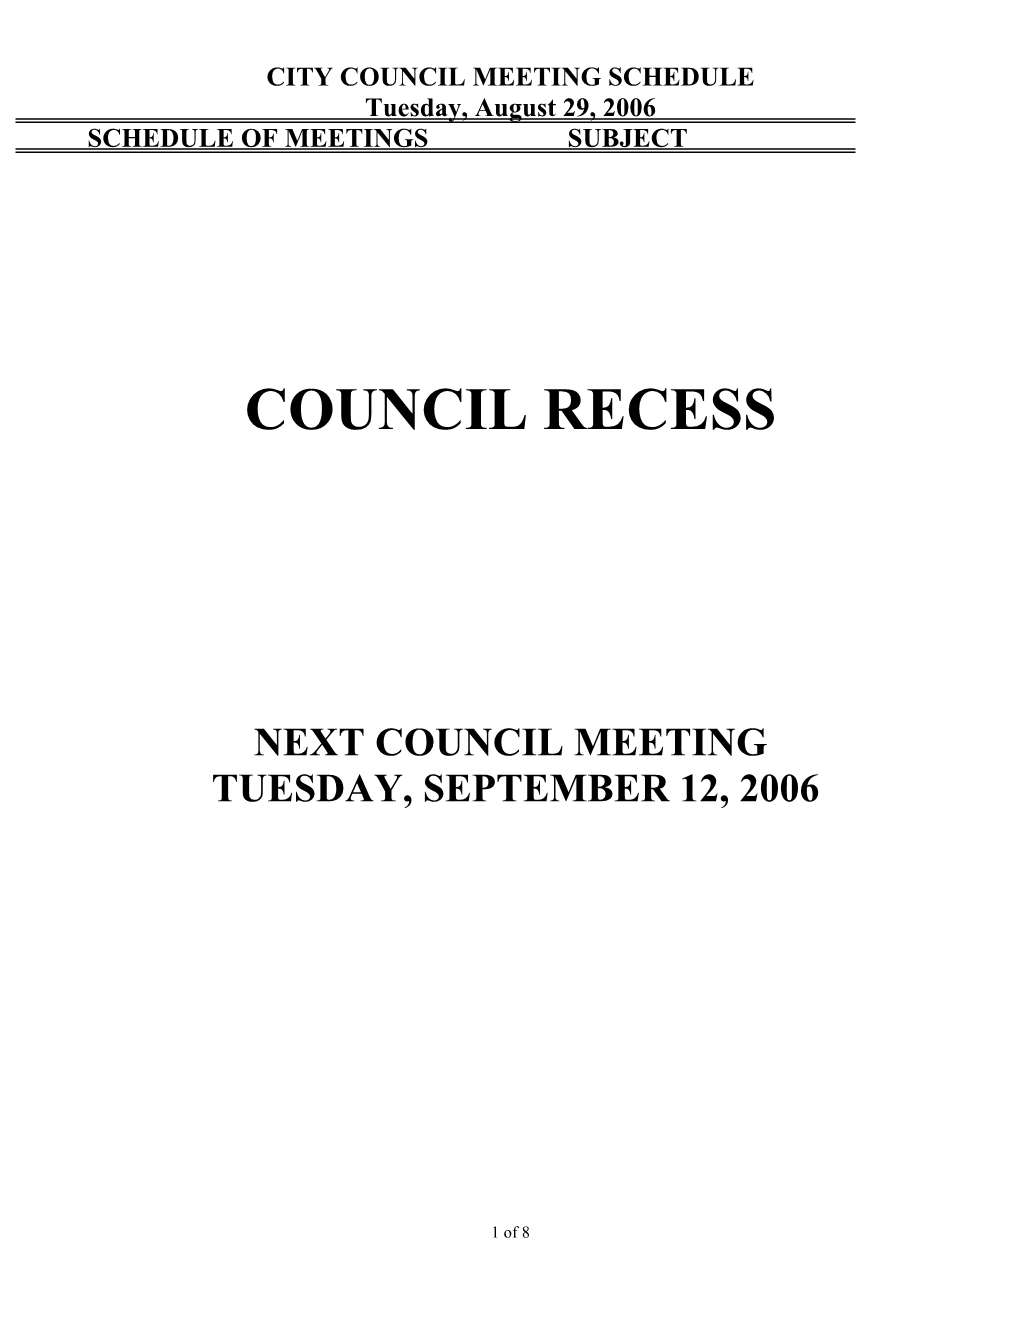 CITY COUNCIL MEETING SCHEDULE Tuesday, August 29, 2006 SCHEDULE of MEETINGS SUBJECT